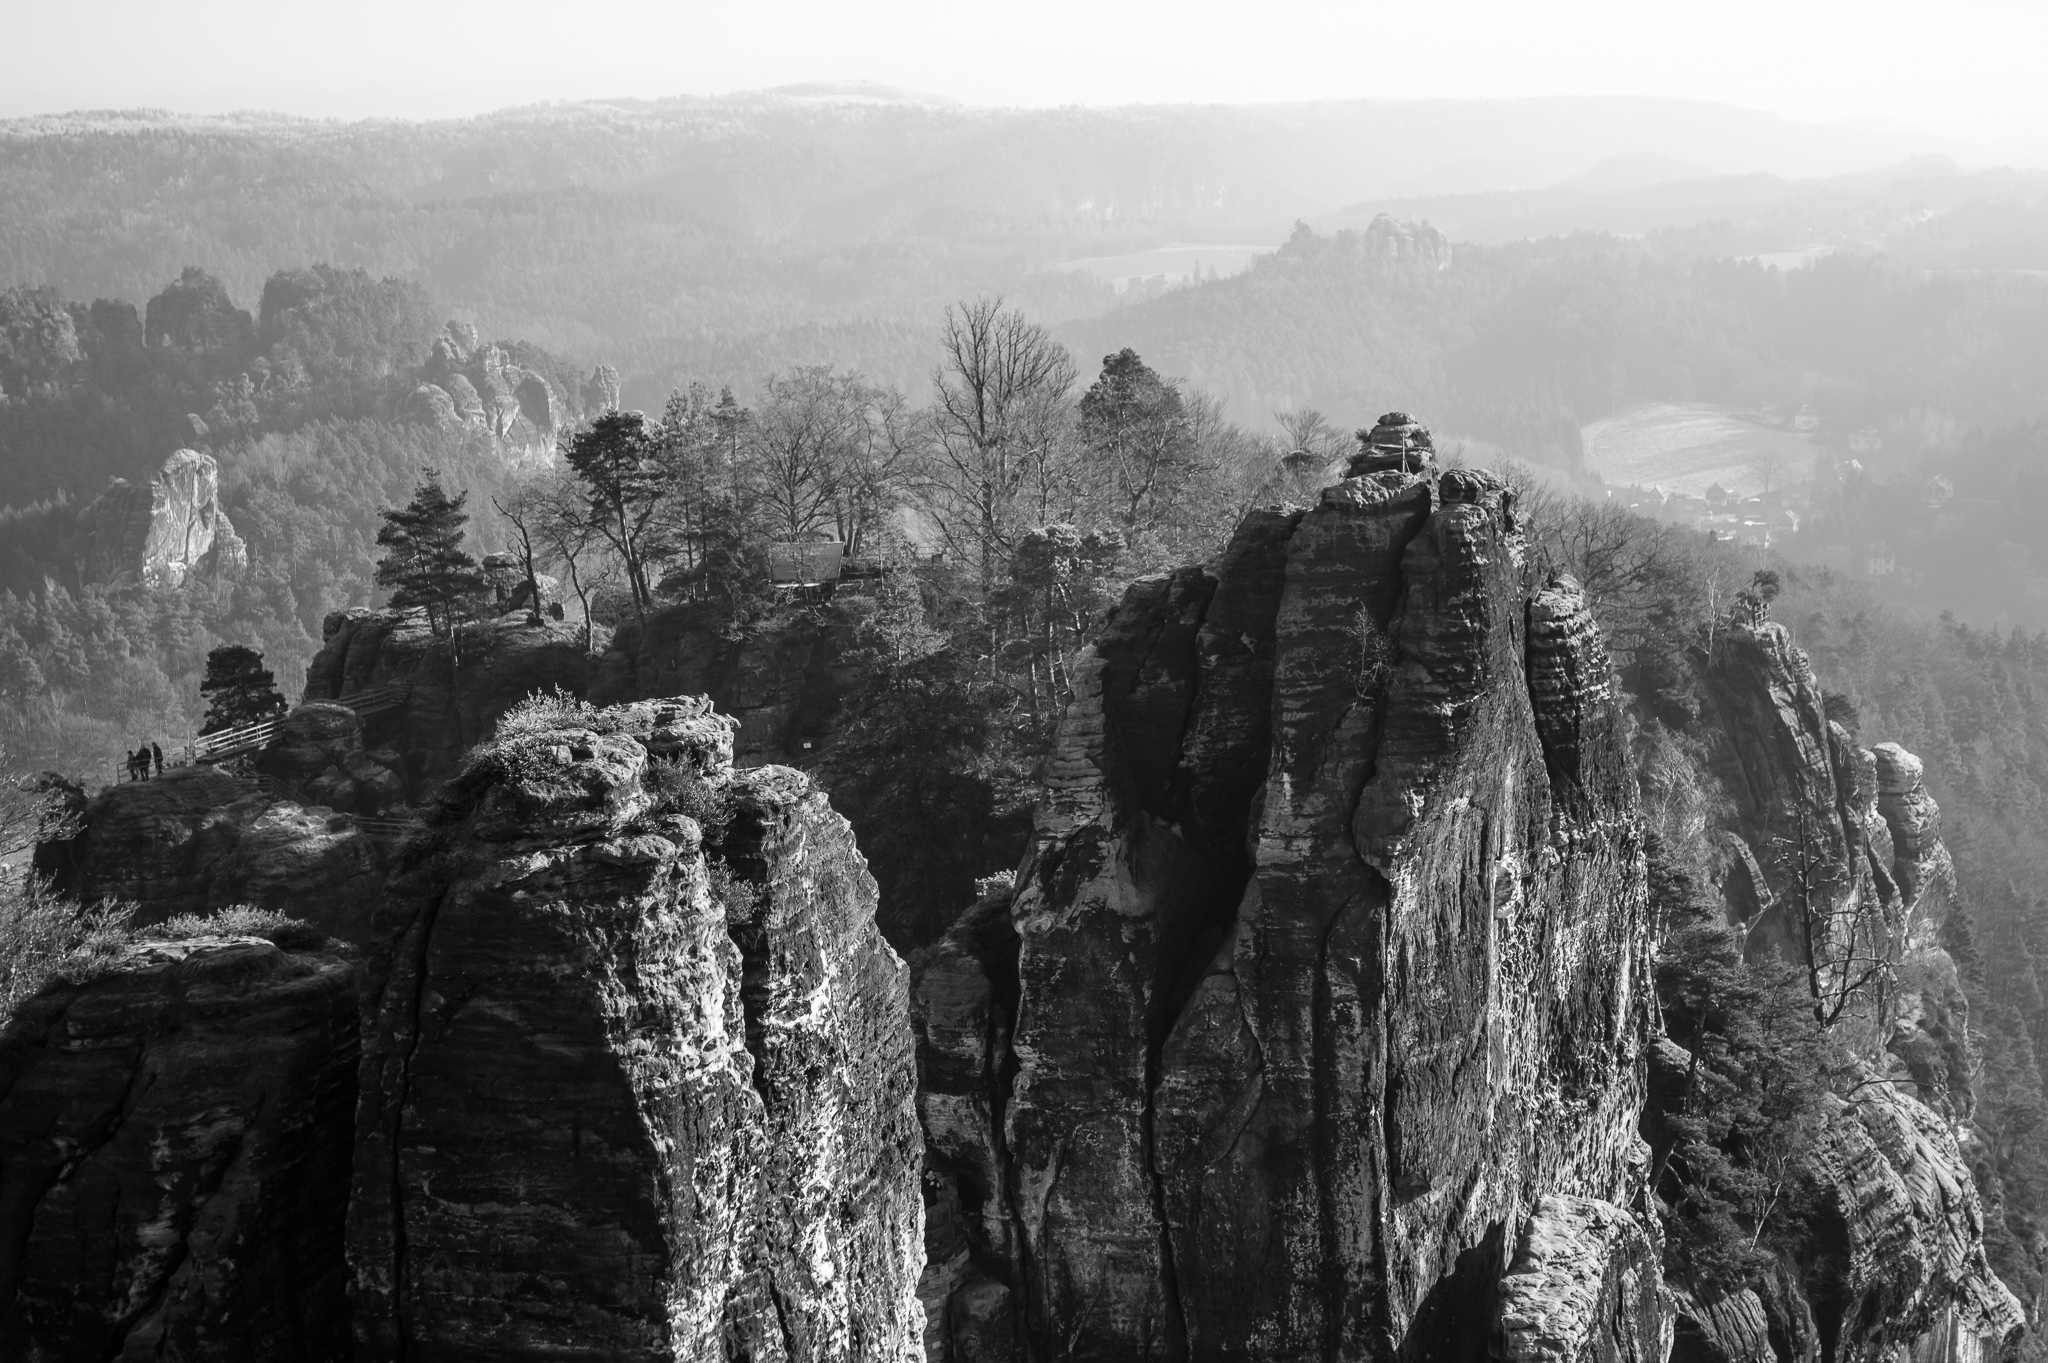 The National Park of Saxon Switzerland is located in Southeastern Germany and south of the city of Dresden. <br> The park, center of a natural space of almost 710 km², extends along the river Elbe. <br> Its characteristic sandstone mountains make up a rocky chain that rises 194 meters above the level of the river.